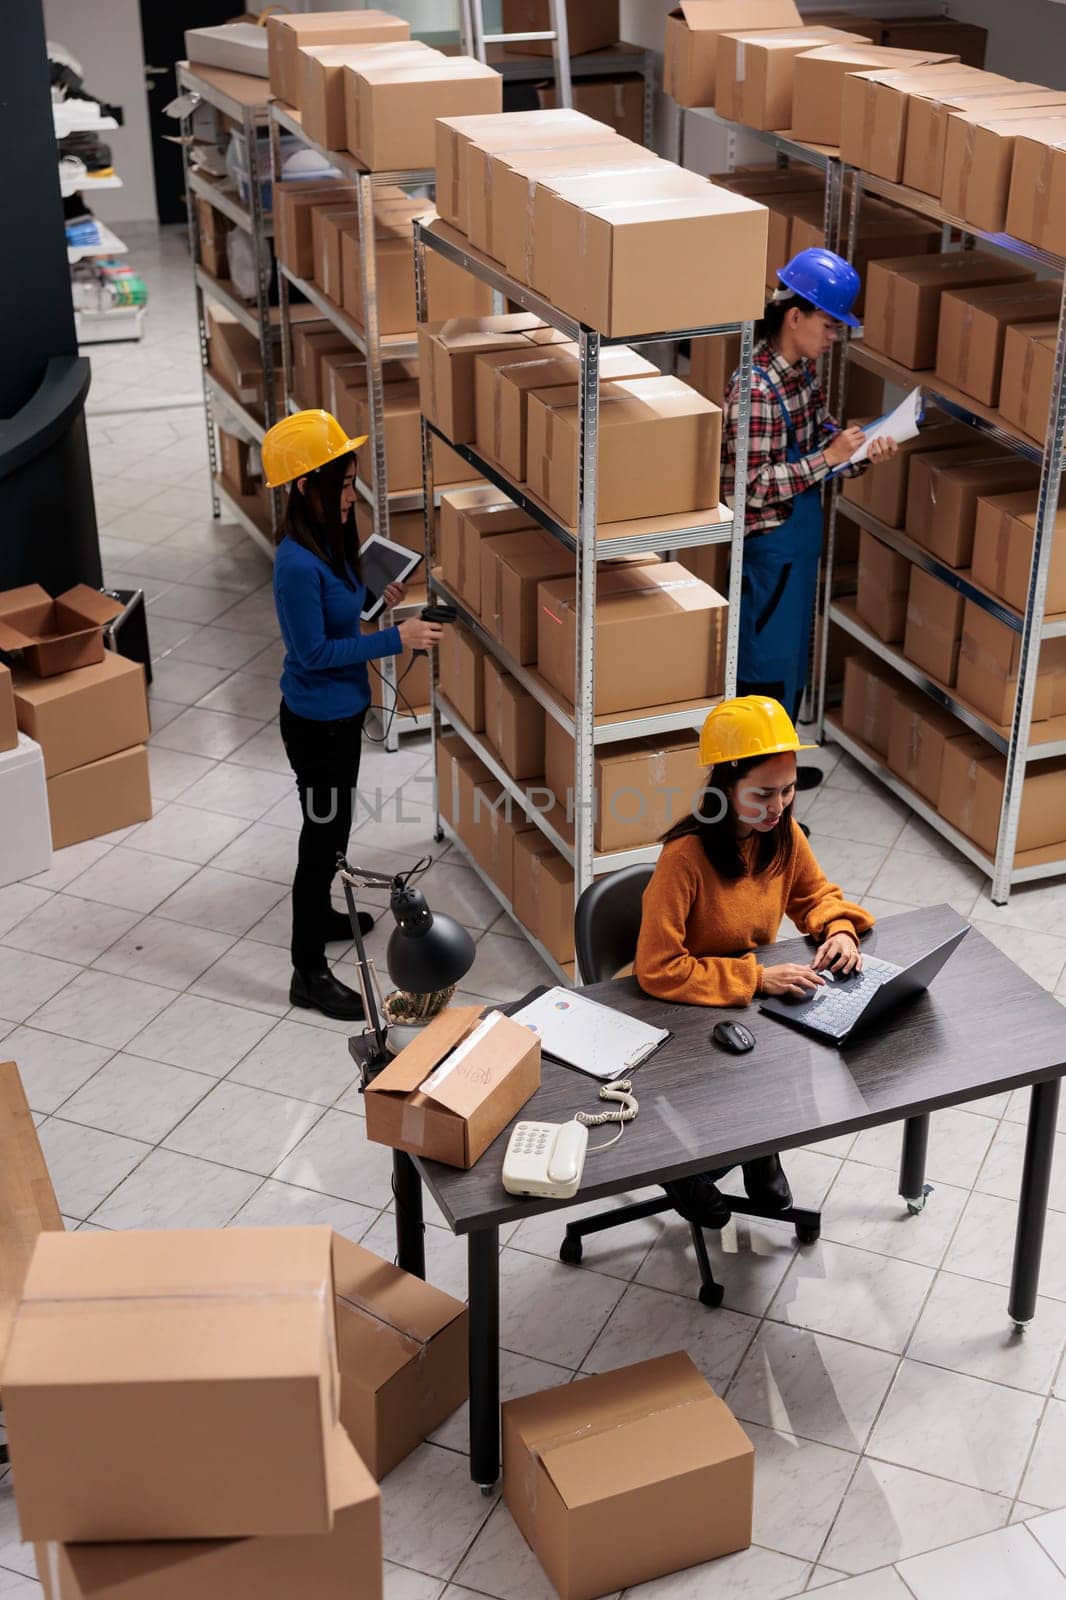 Industrial storehouse asian coworkers doing inventory in storage room full of cardboard boxes on shelves. Postal service warehouse young colleagues team in protective helmets working together top view